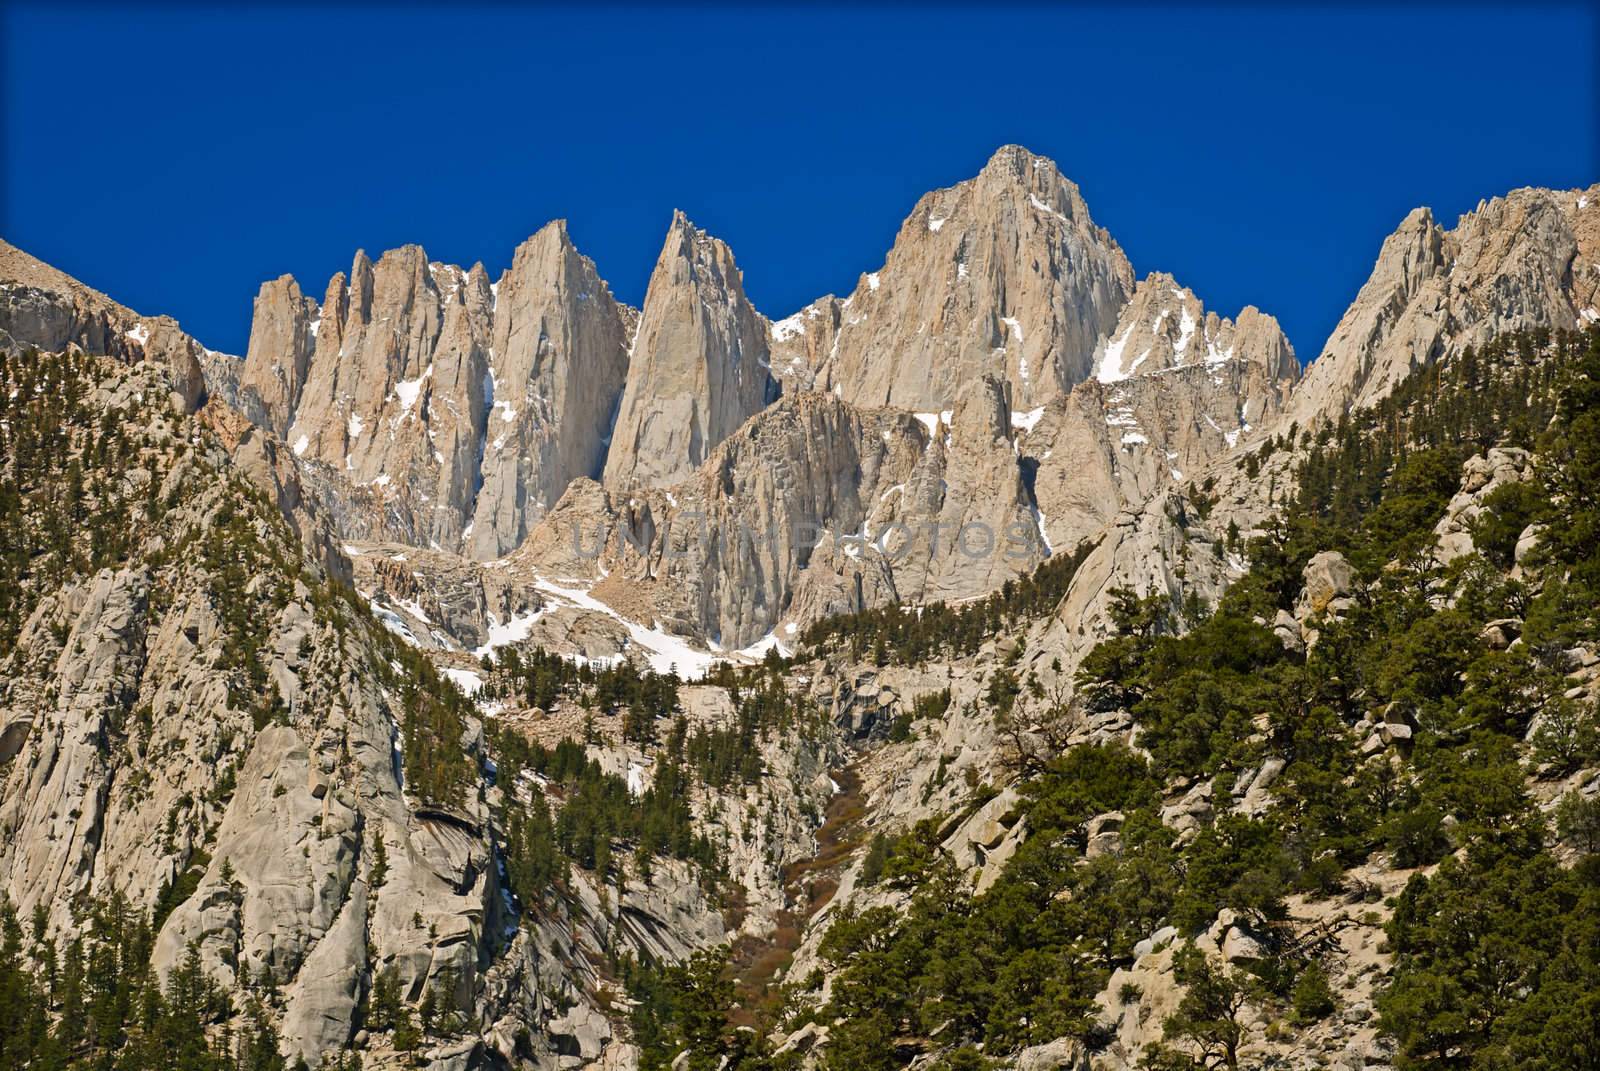 Mt. Whitney (right) (elevation: 14,497 ft. above sea level, highest peak in Lower 48), seen from Whitney Portal Road, Inyo County, CA, USA by CharlesBolin